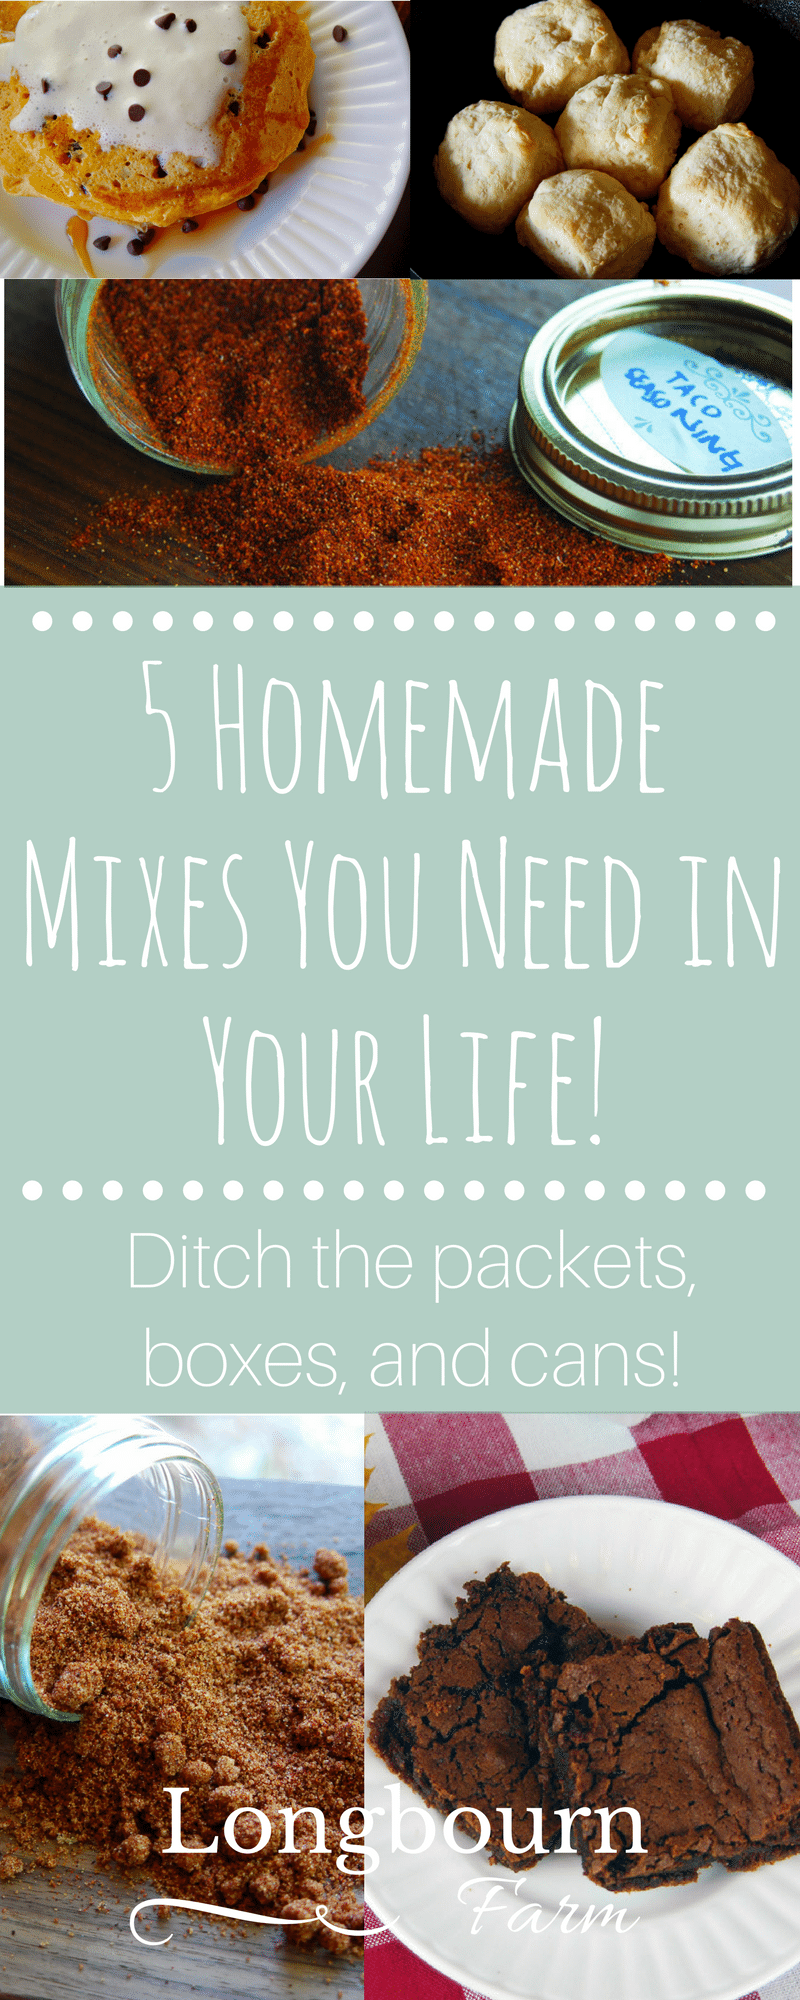 Homemade mixes are a fantastic way to eat a little healthier and gain massive flavor. Click for 5 stellar homemade mix recipes + other homemade food tips!